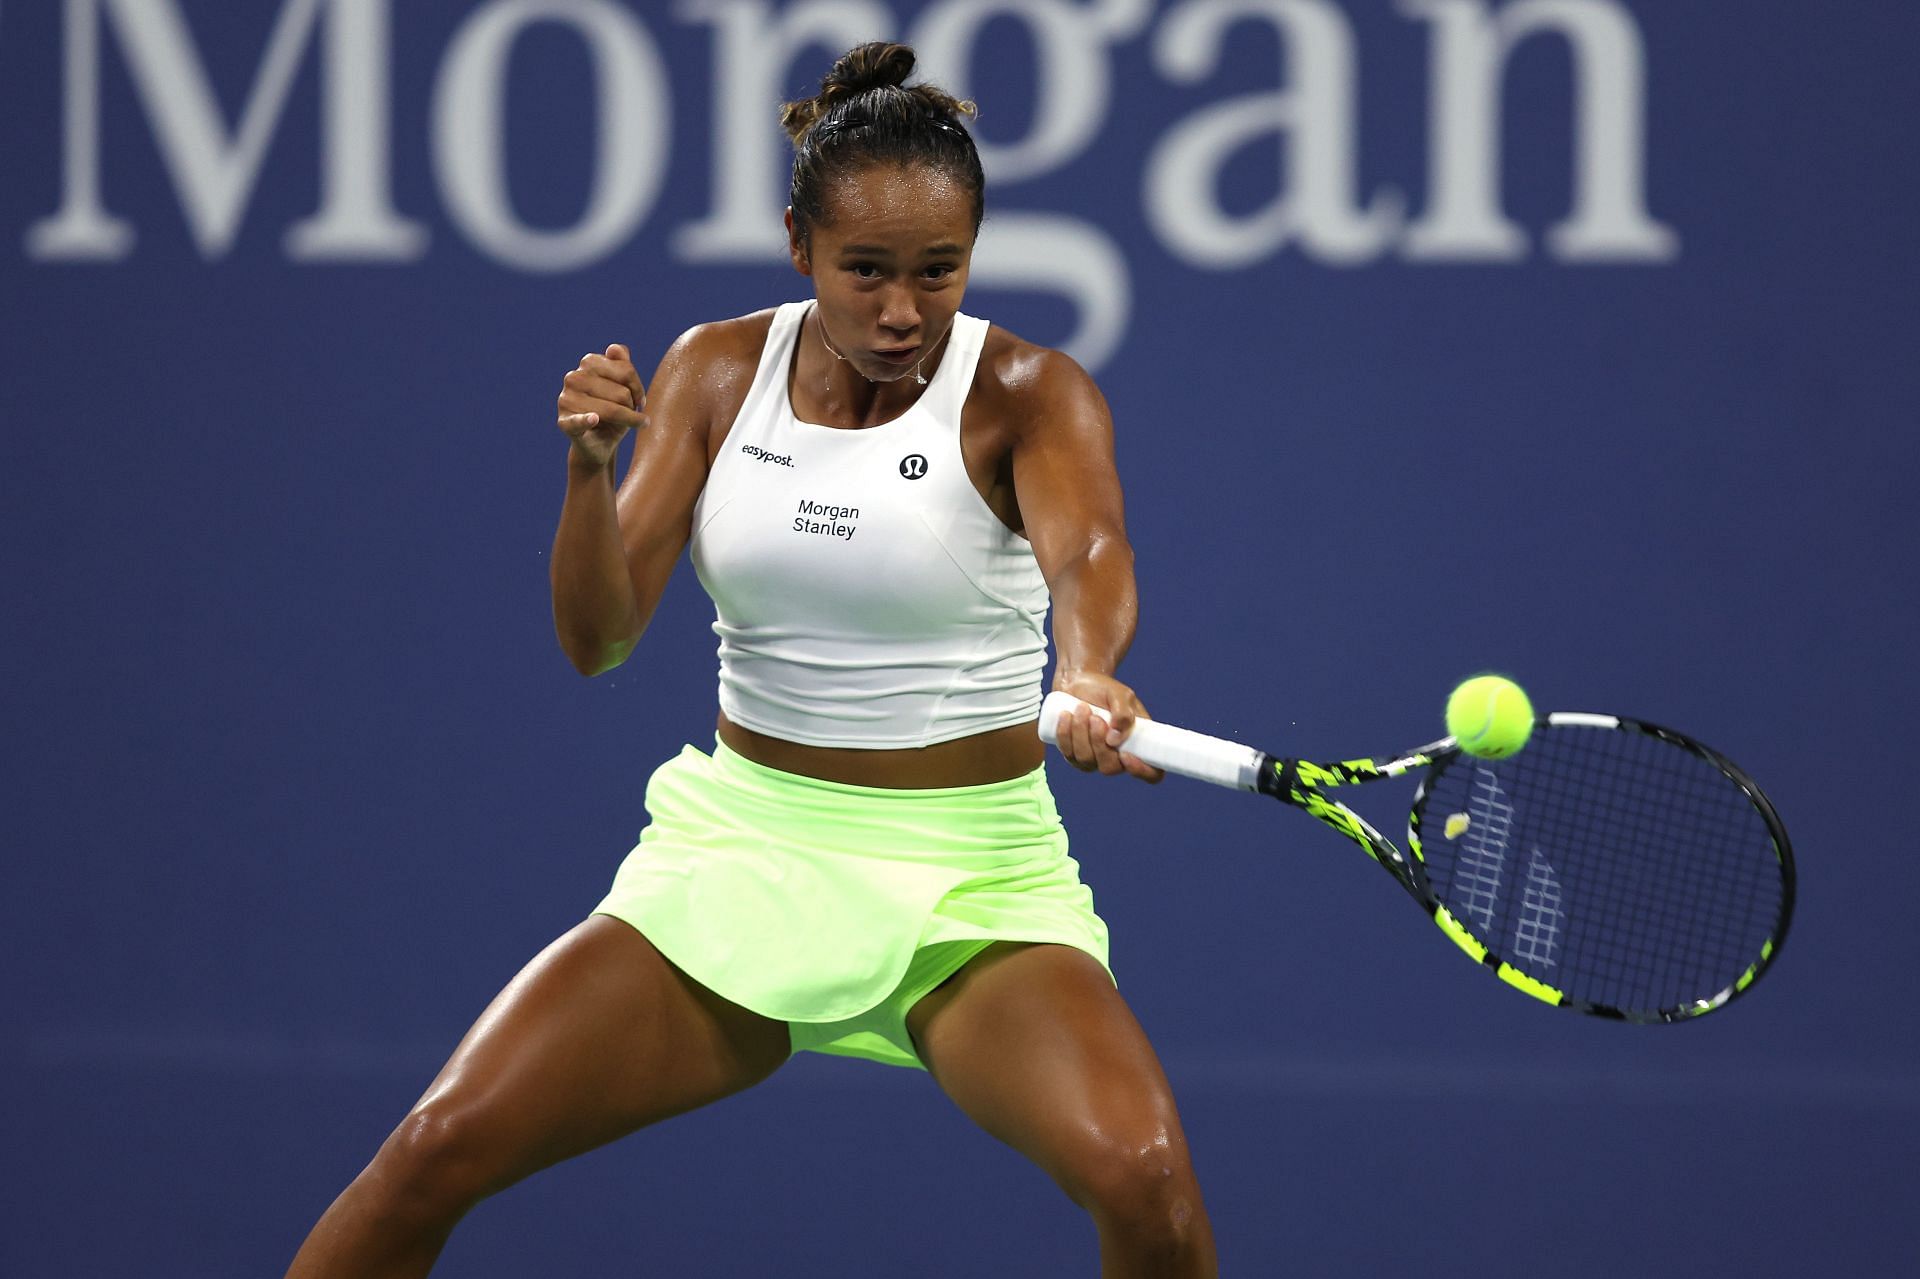 Leylah Fernandez said she was terrified to get on court in her first professional match